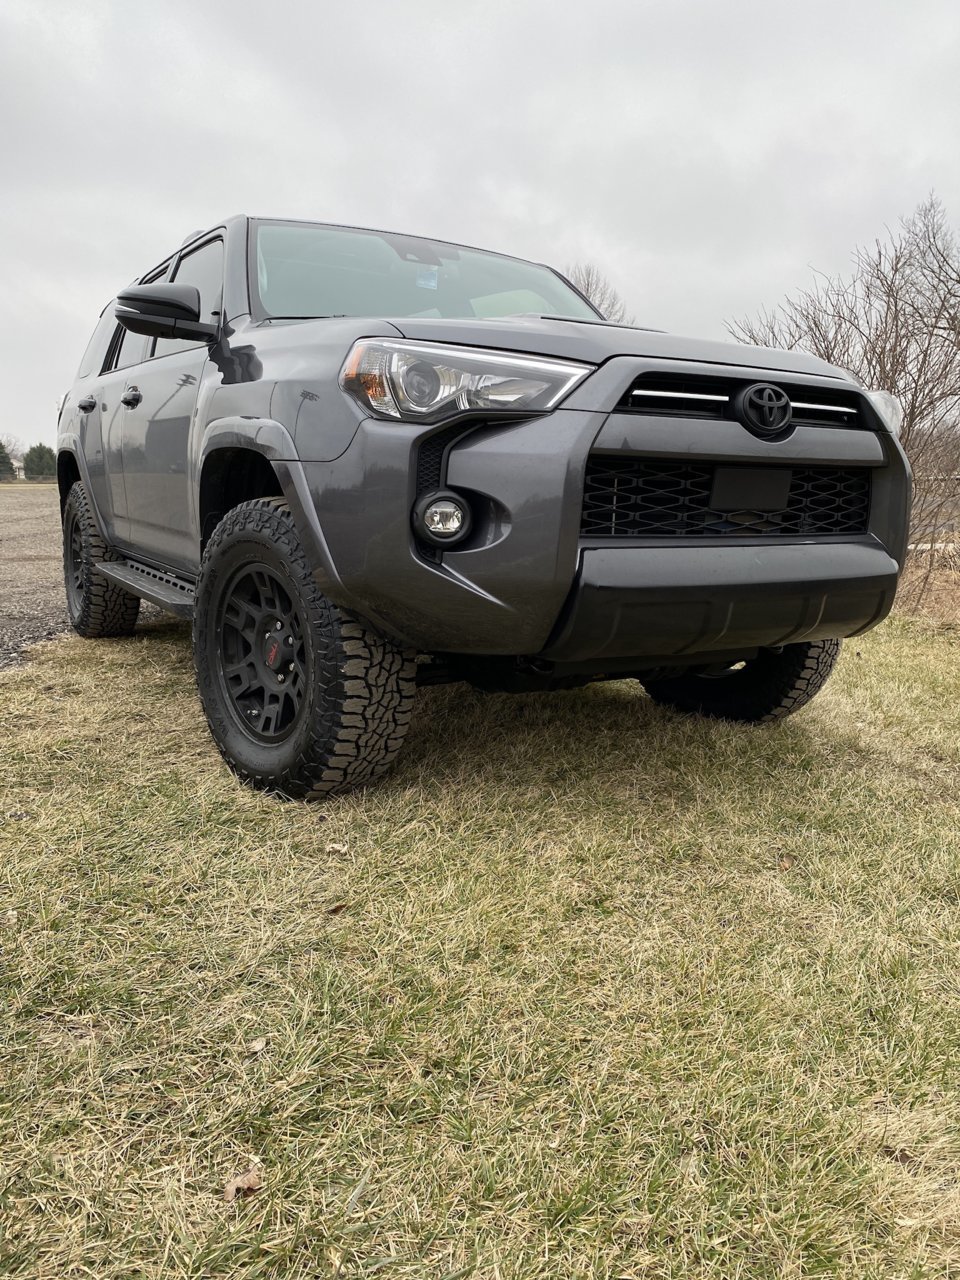 So this happened today | Toyota 4Runner Forum []